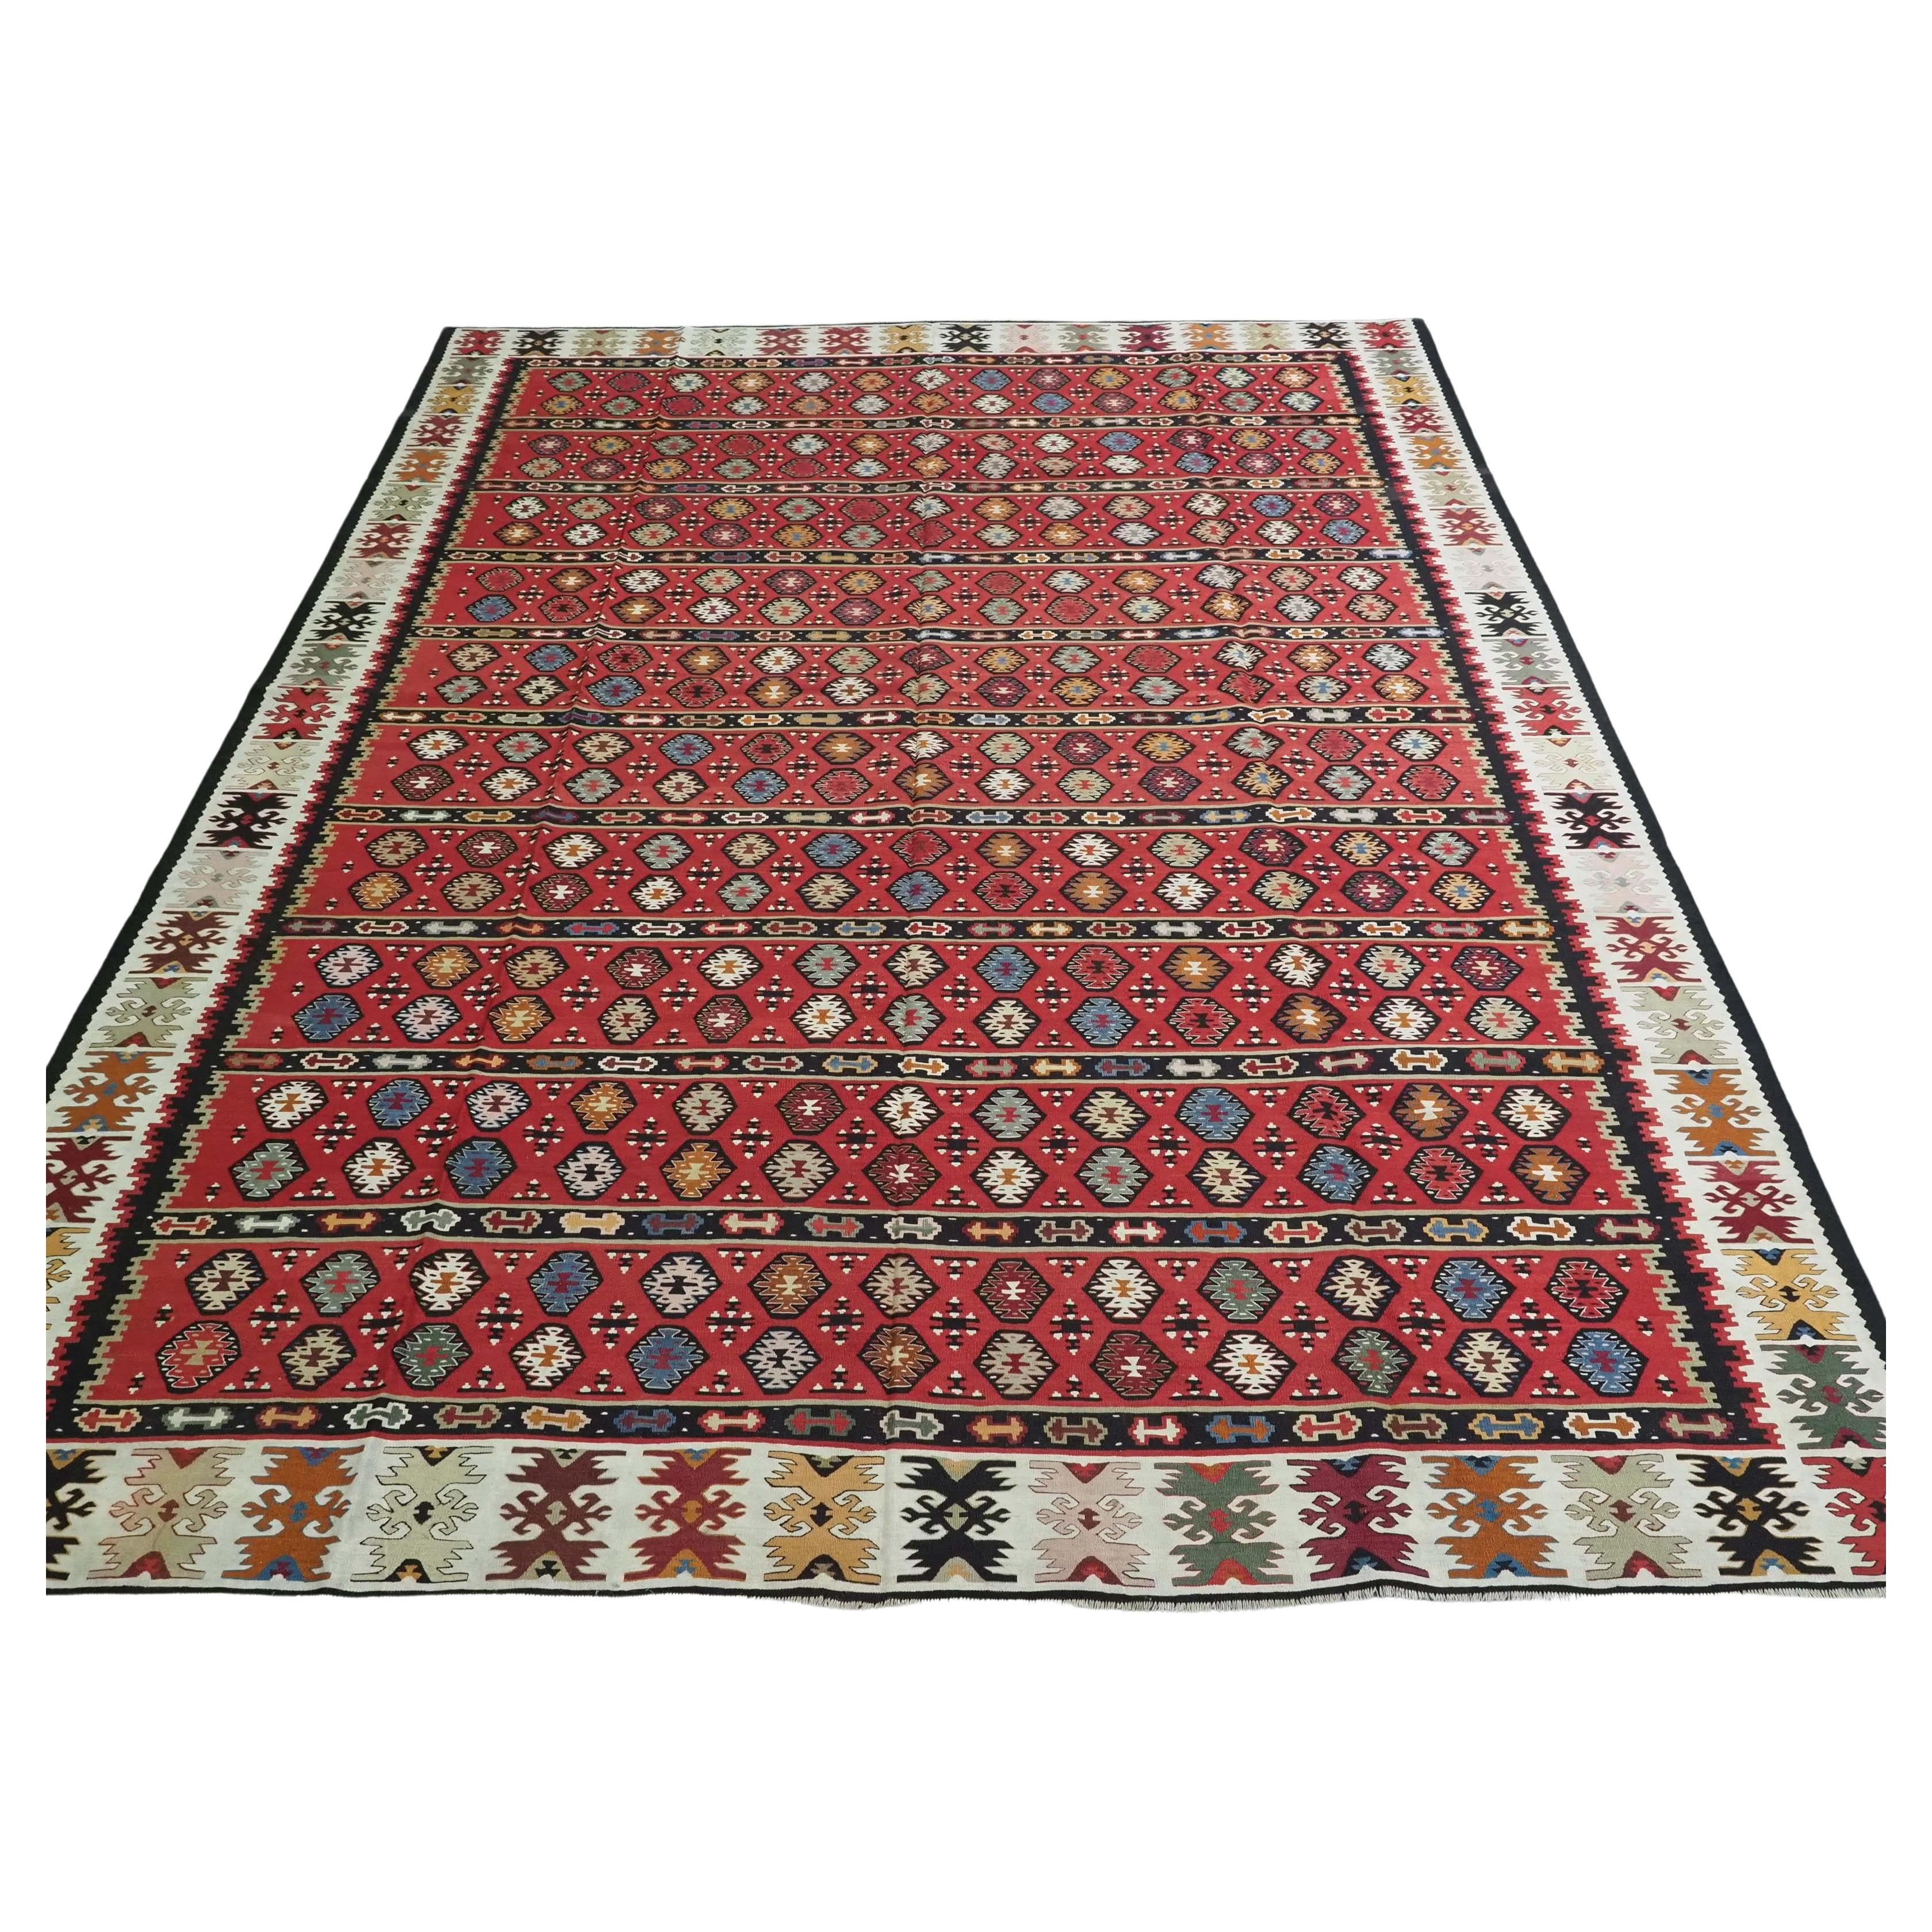 Antique Pirot / Sarkoy kilim of traditional fine banded design, circa 1920. For Sale